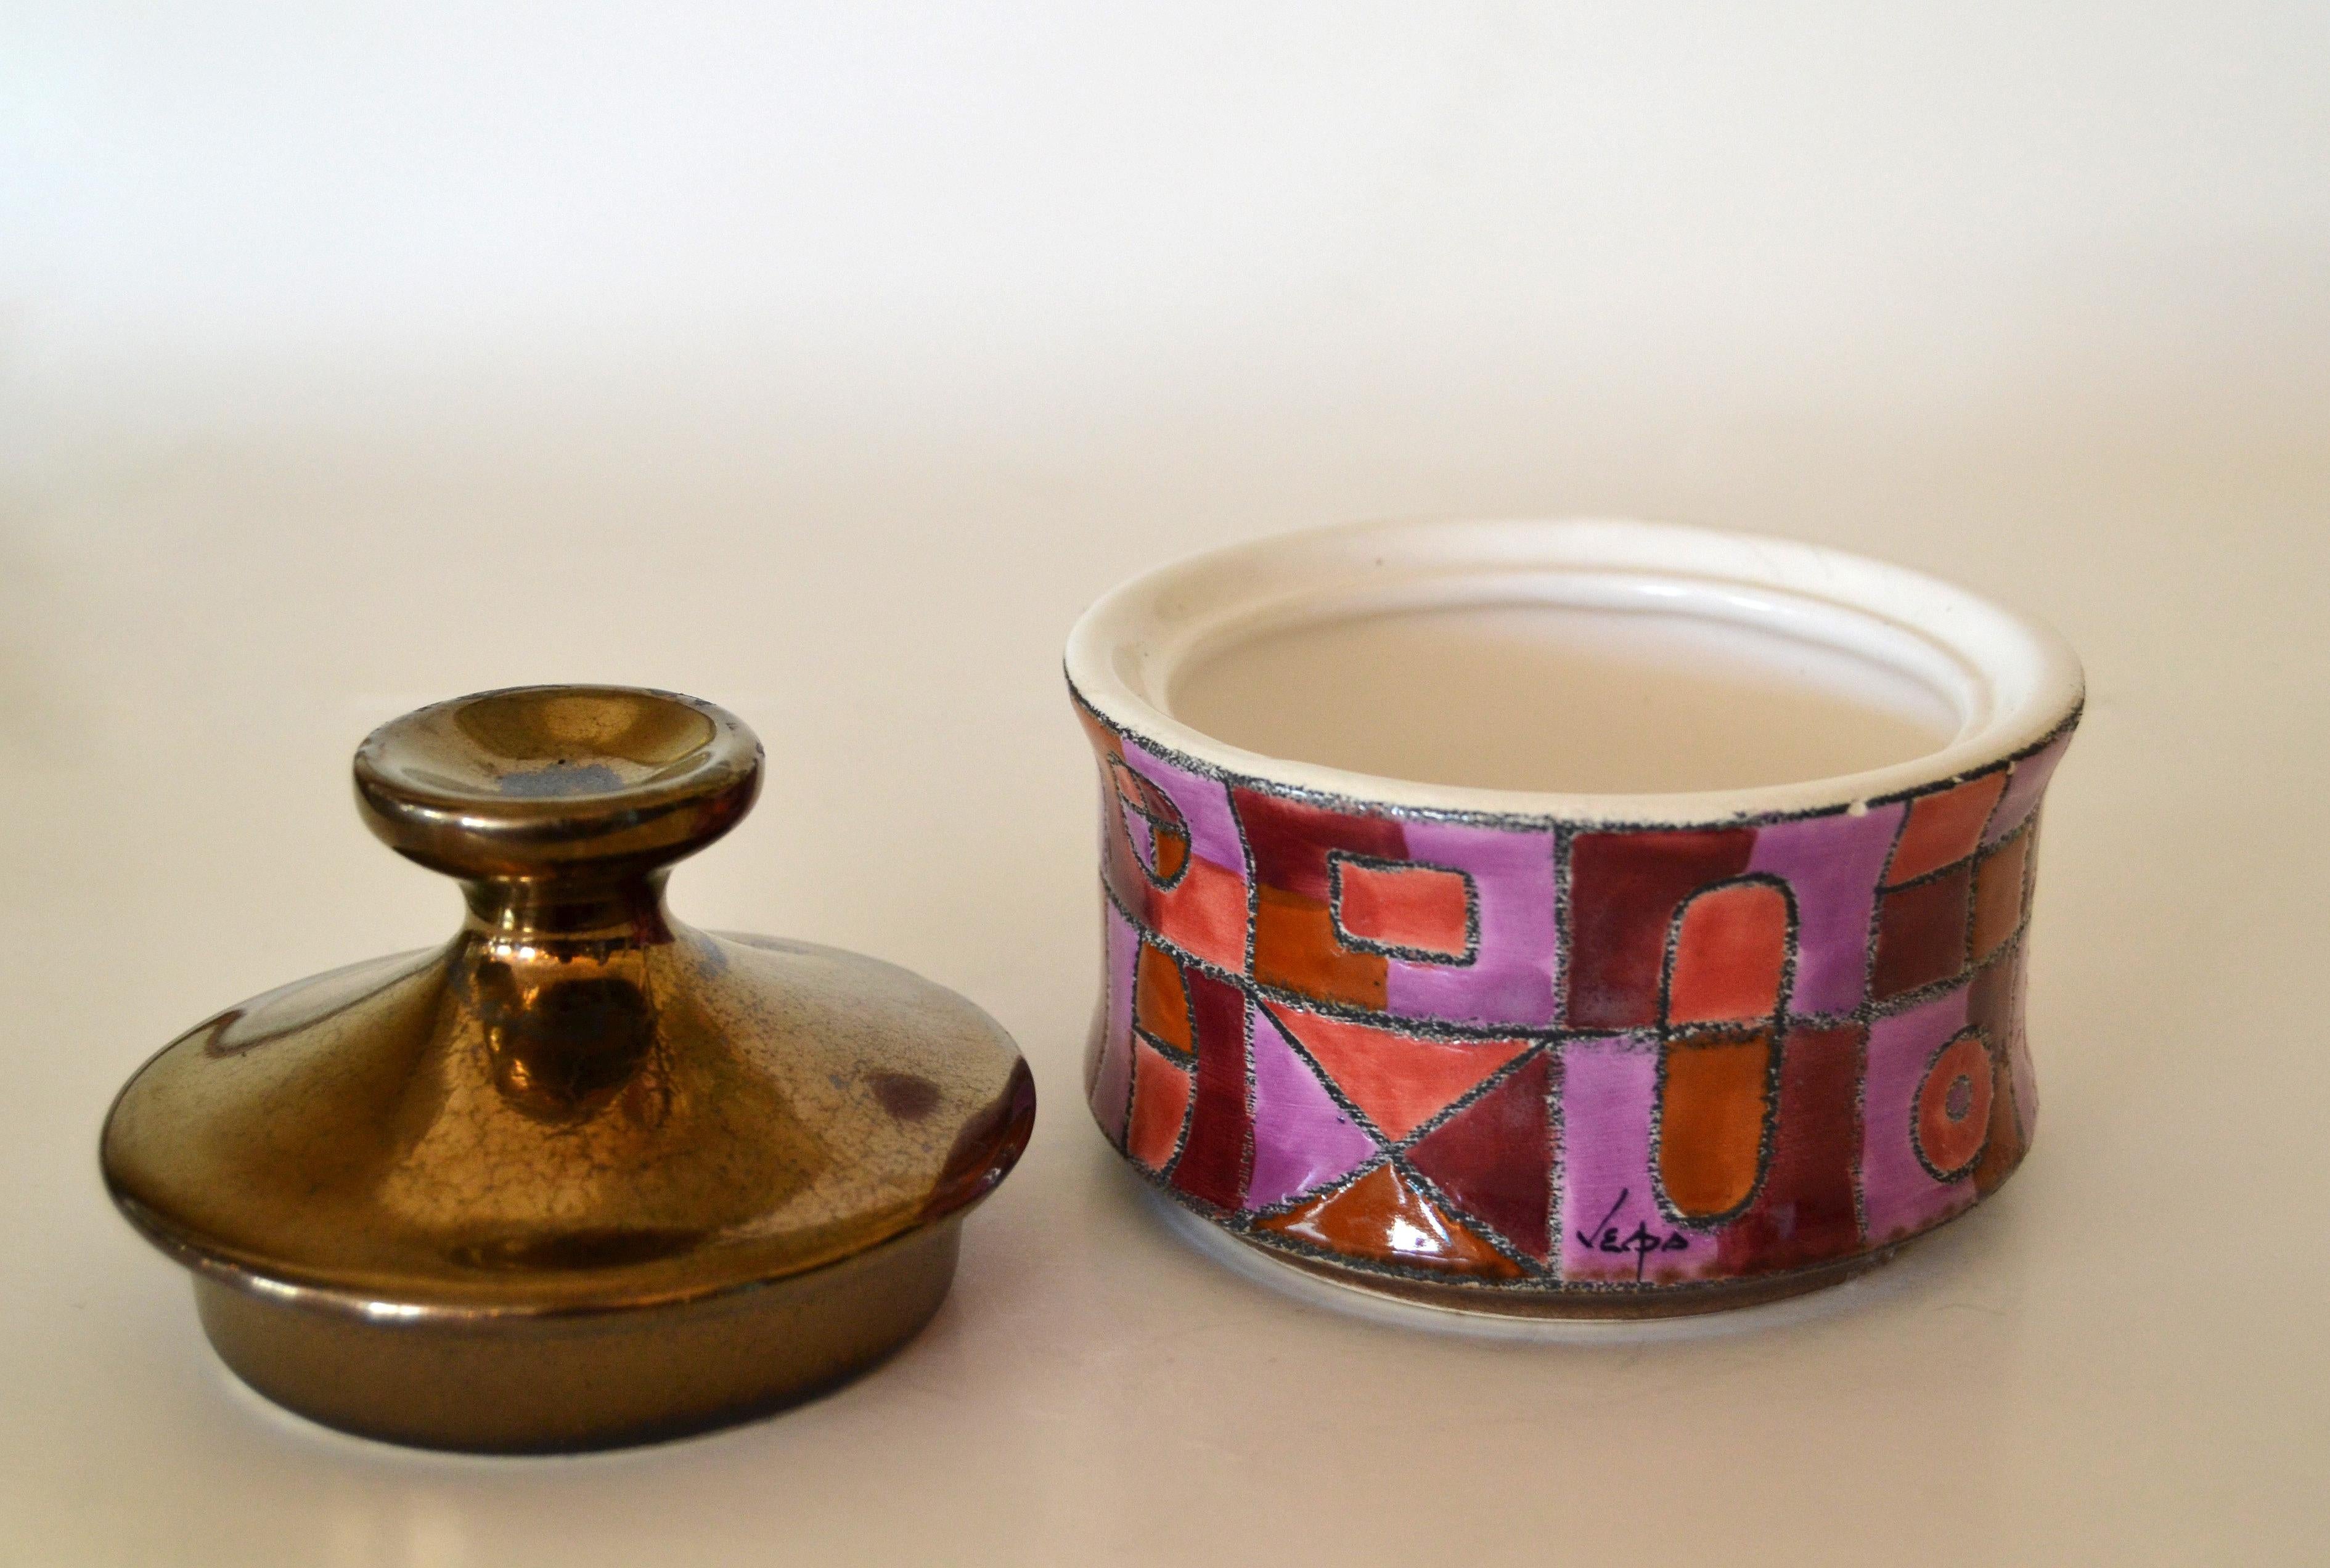 European Marked Ceramic Sugar Bowl with Lid in Purple, Bronze & Shades of Maroon Color